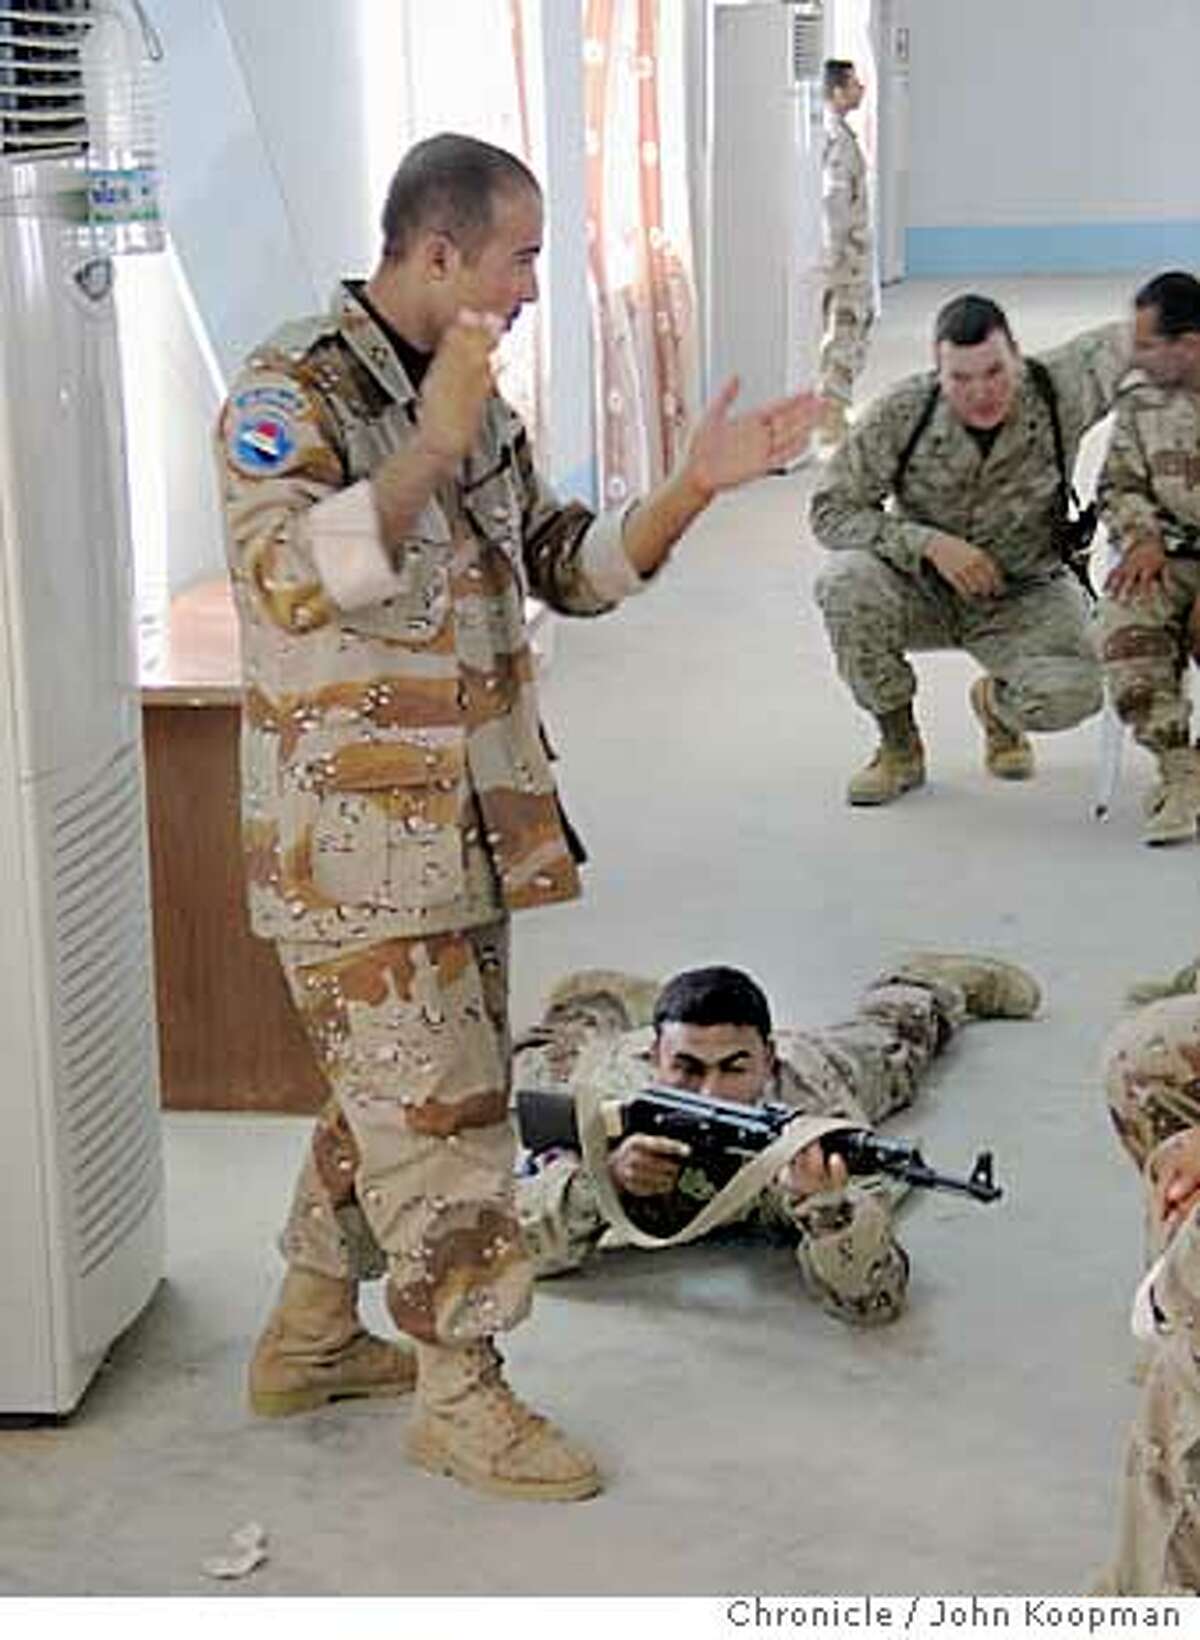 Marine Sgt. Bill Knipper conducts training in squad tactics with Iraqi commando recruits. Chronicle photo by John Koopman